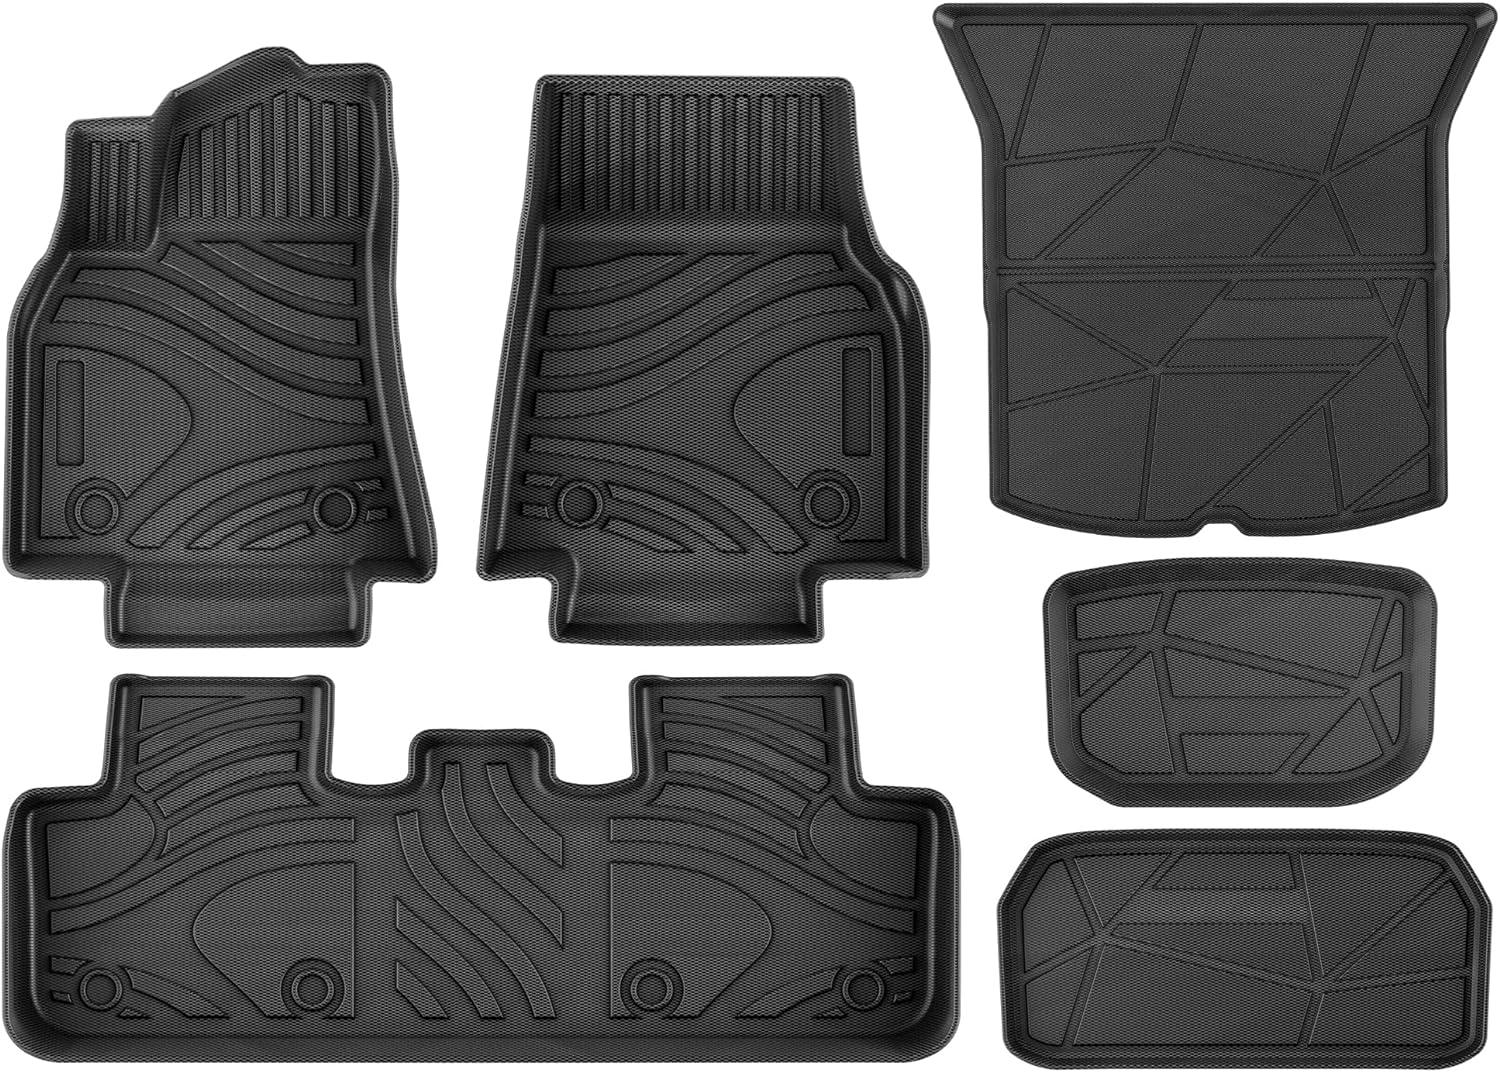 Tesla Model Y All Weather Floor Mats for $56.99 Shipped